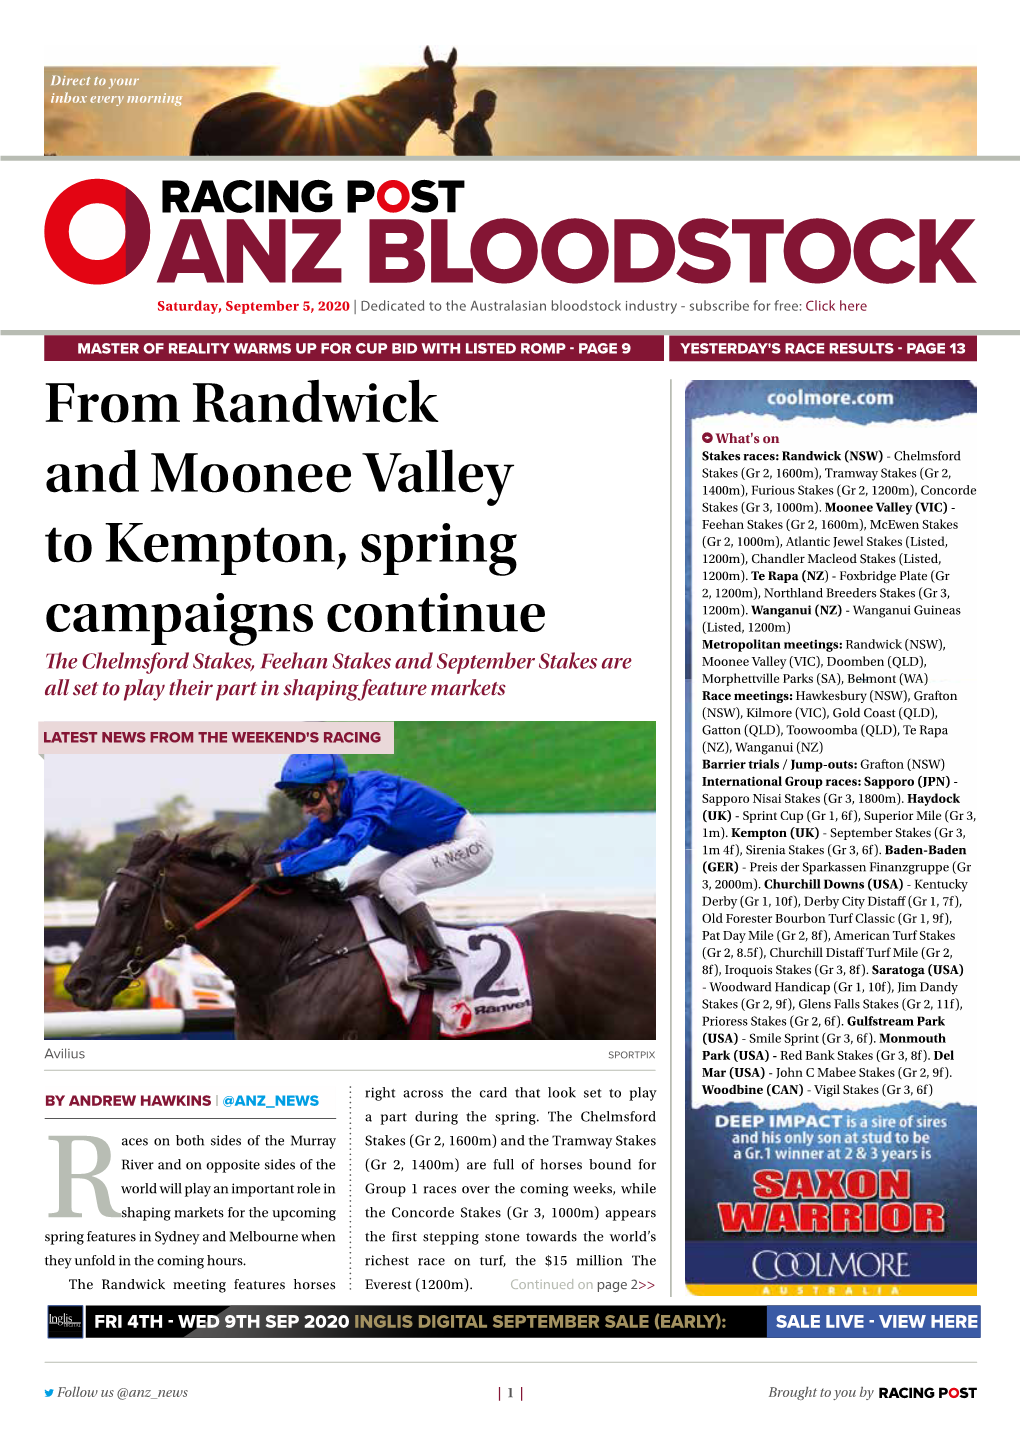 From Randwick and Moonee Valley to Kempton, Spring Campaigns Continue | 3 | Saturday, September 5, 2020